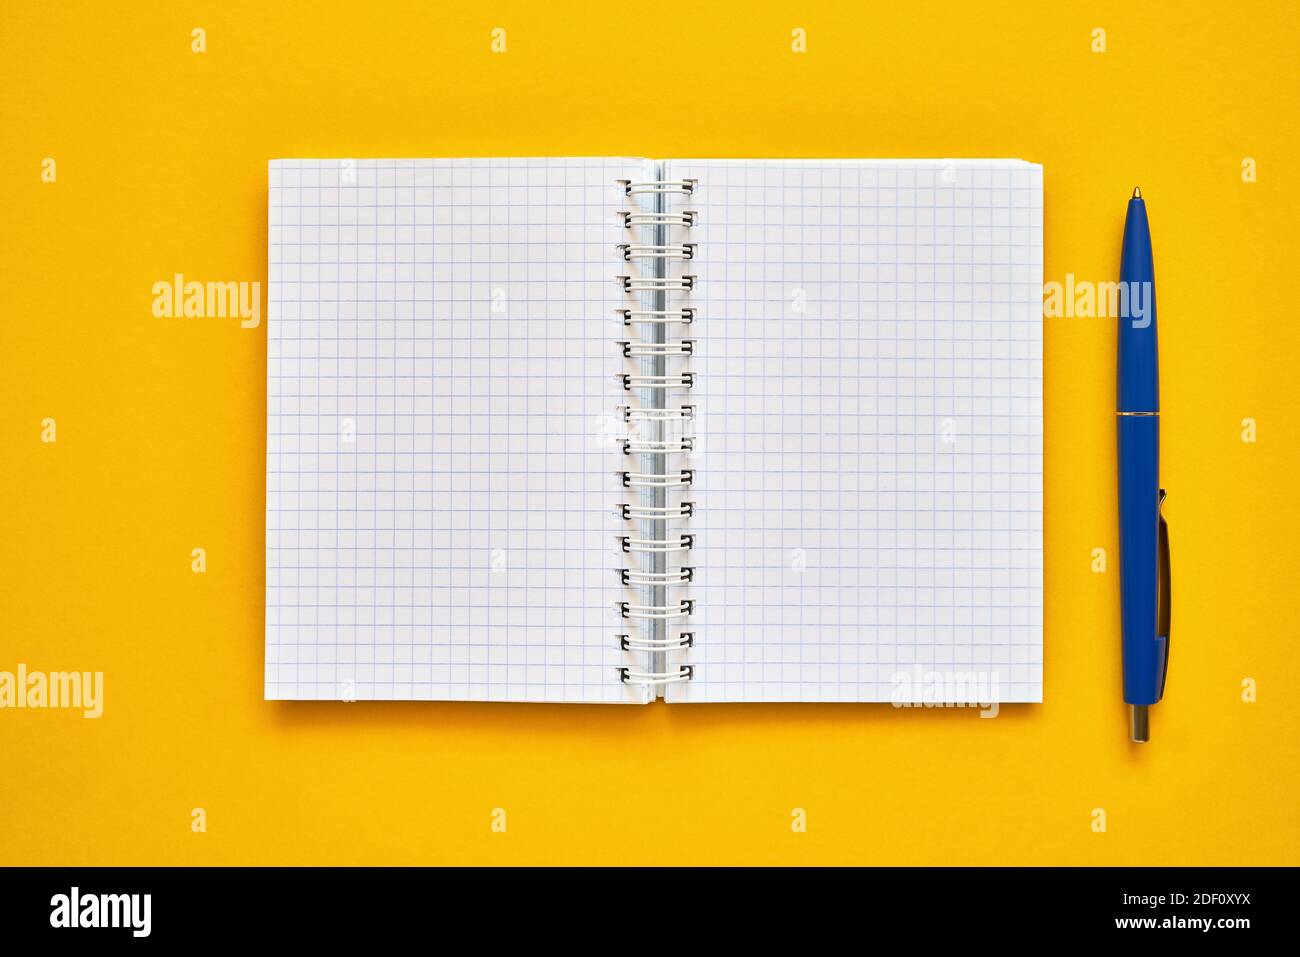 Top view of an open notebook with blank squared pages and blue pen. School notebook on a yellow background, spiral notepad. Back to school concept. Stock Photo